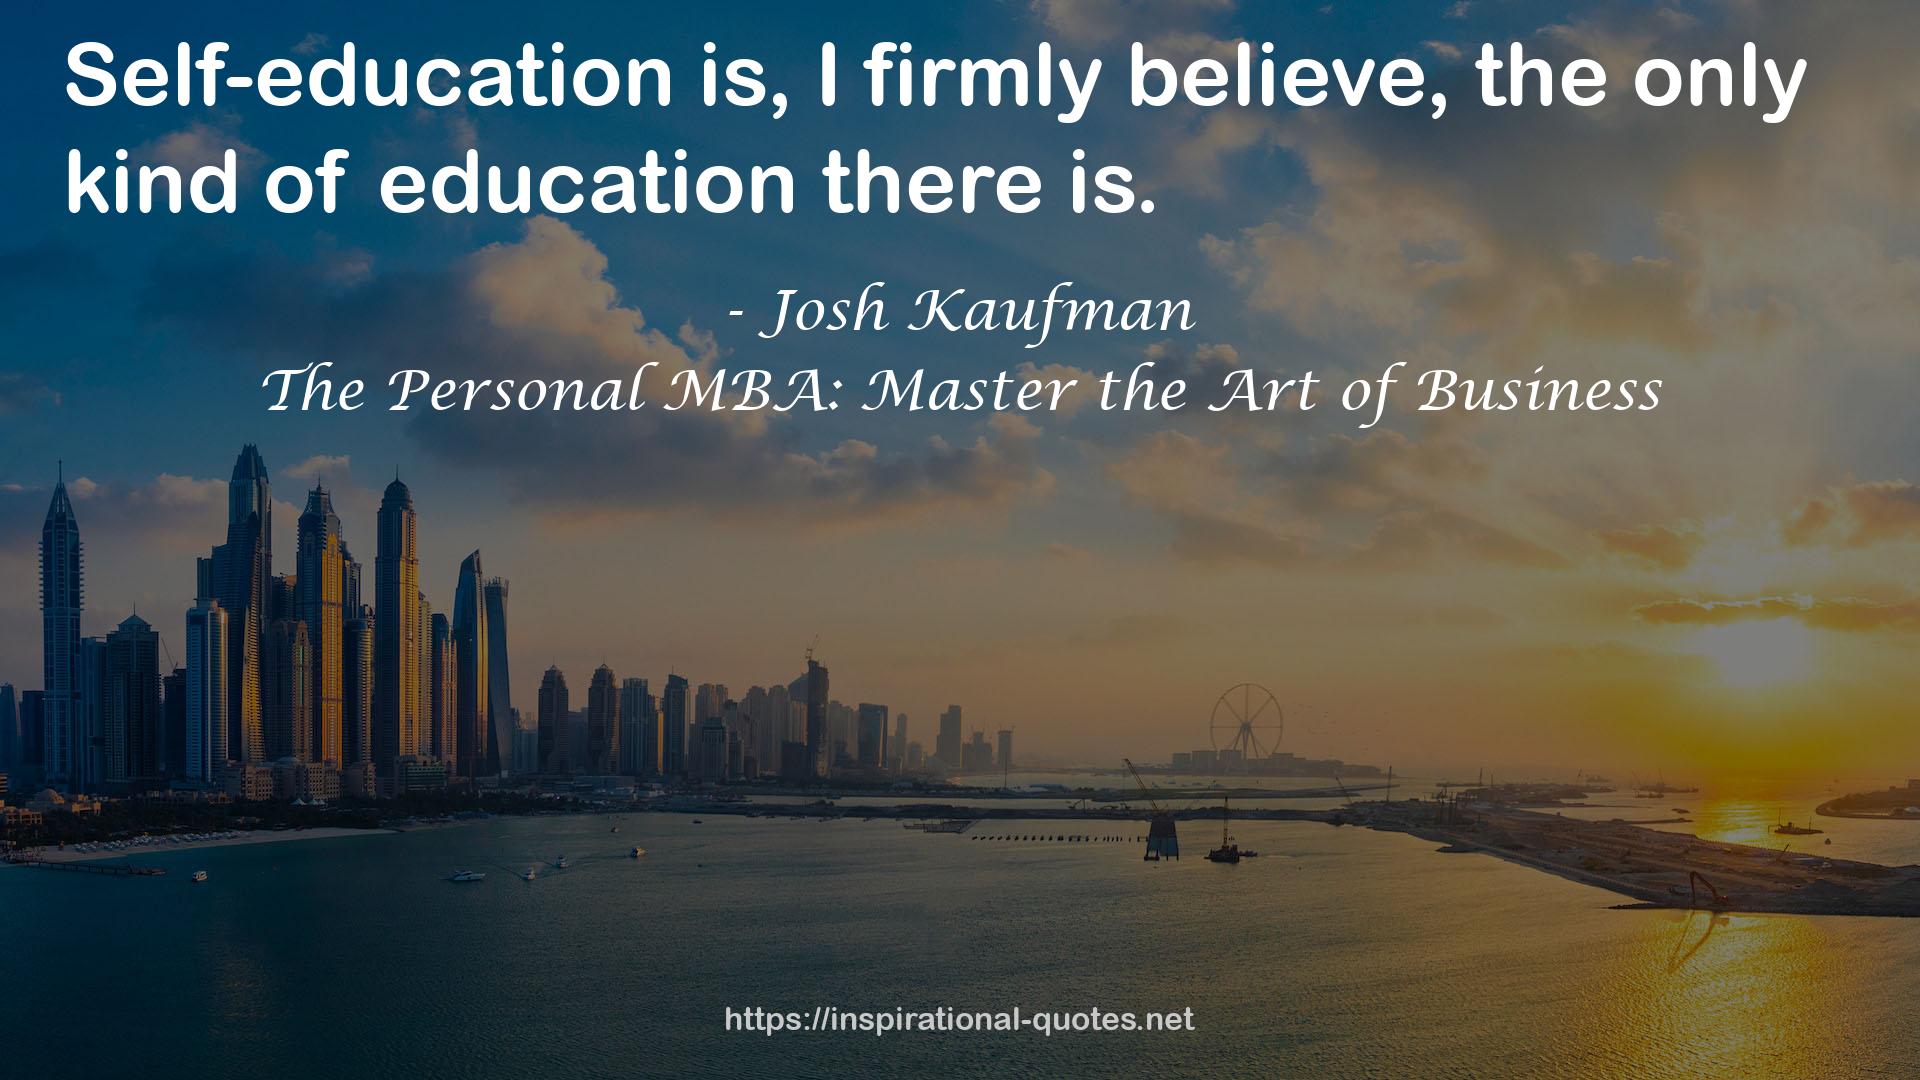 The Personal MBA: Master the Art of Business QUOTES